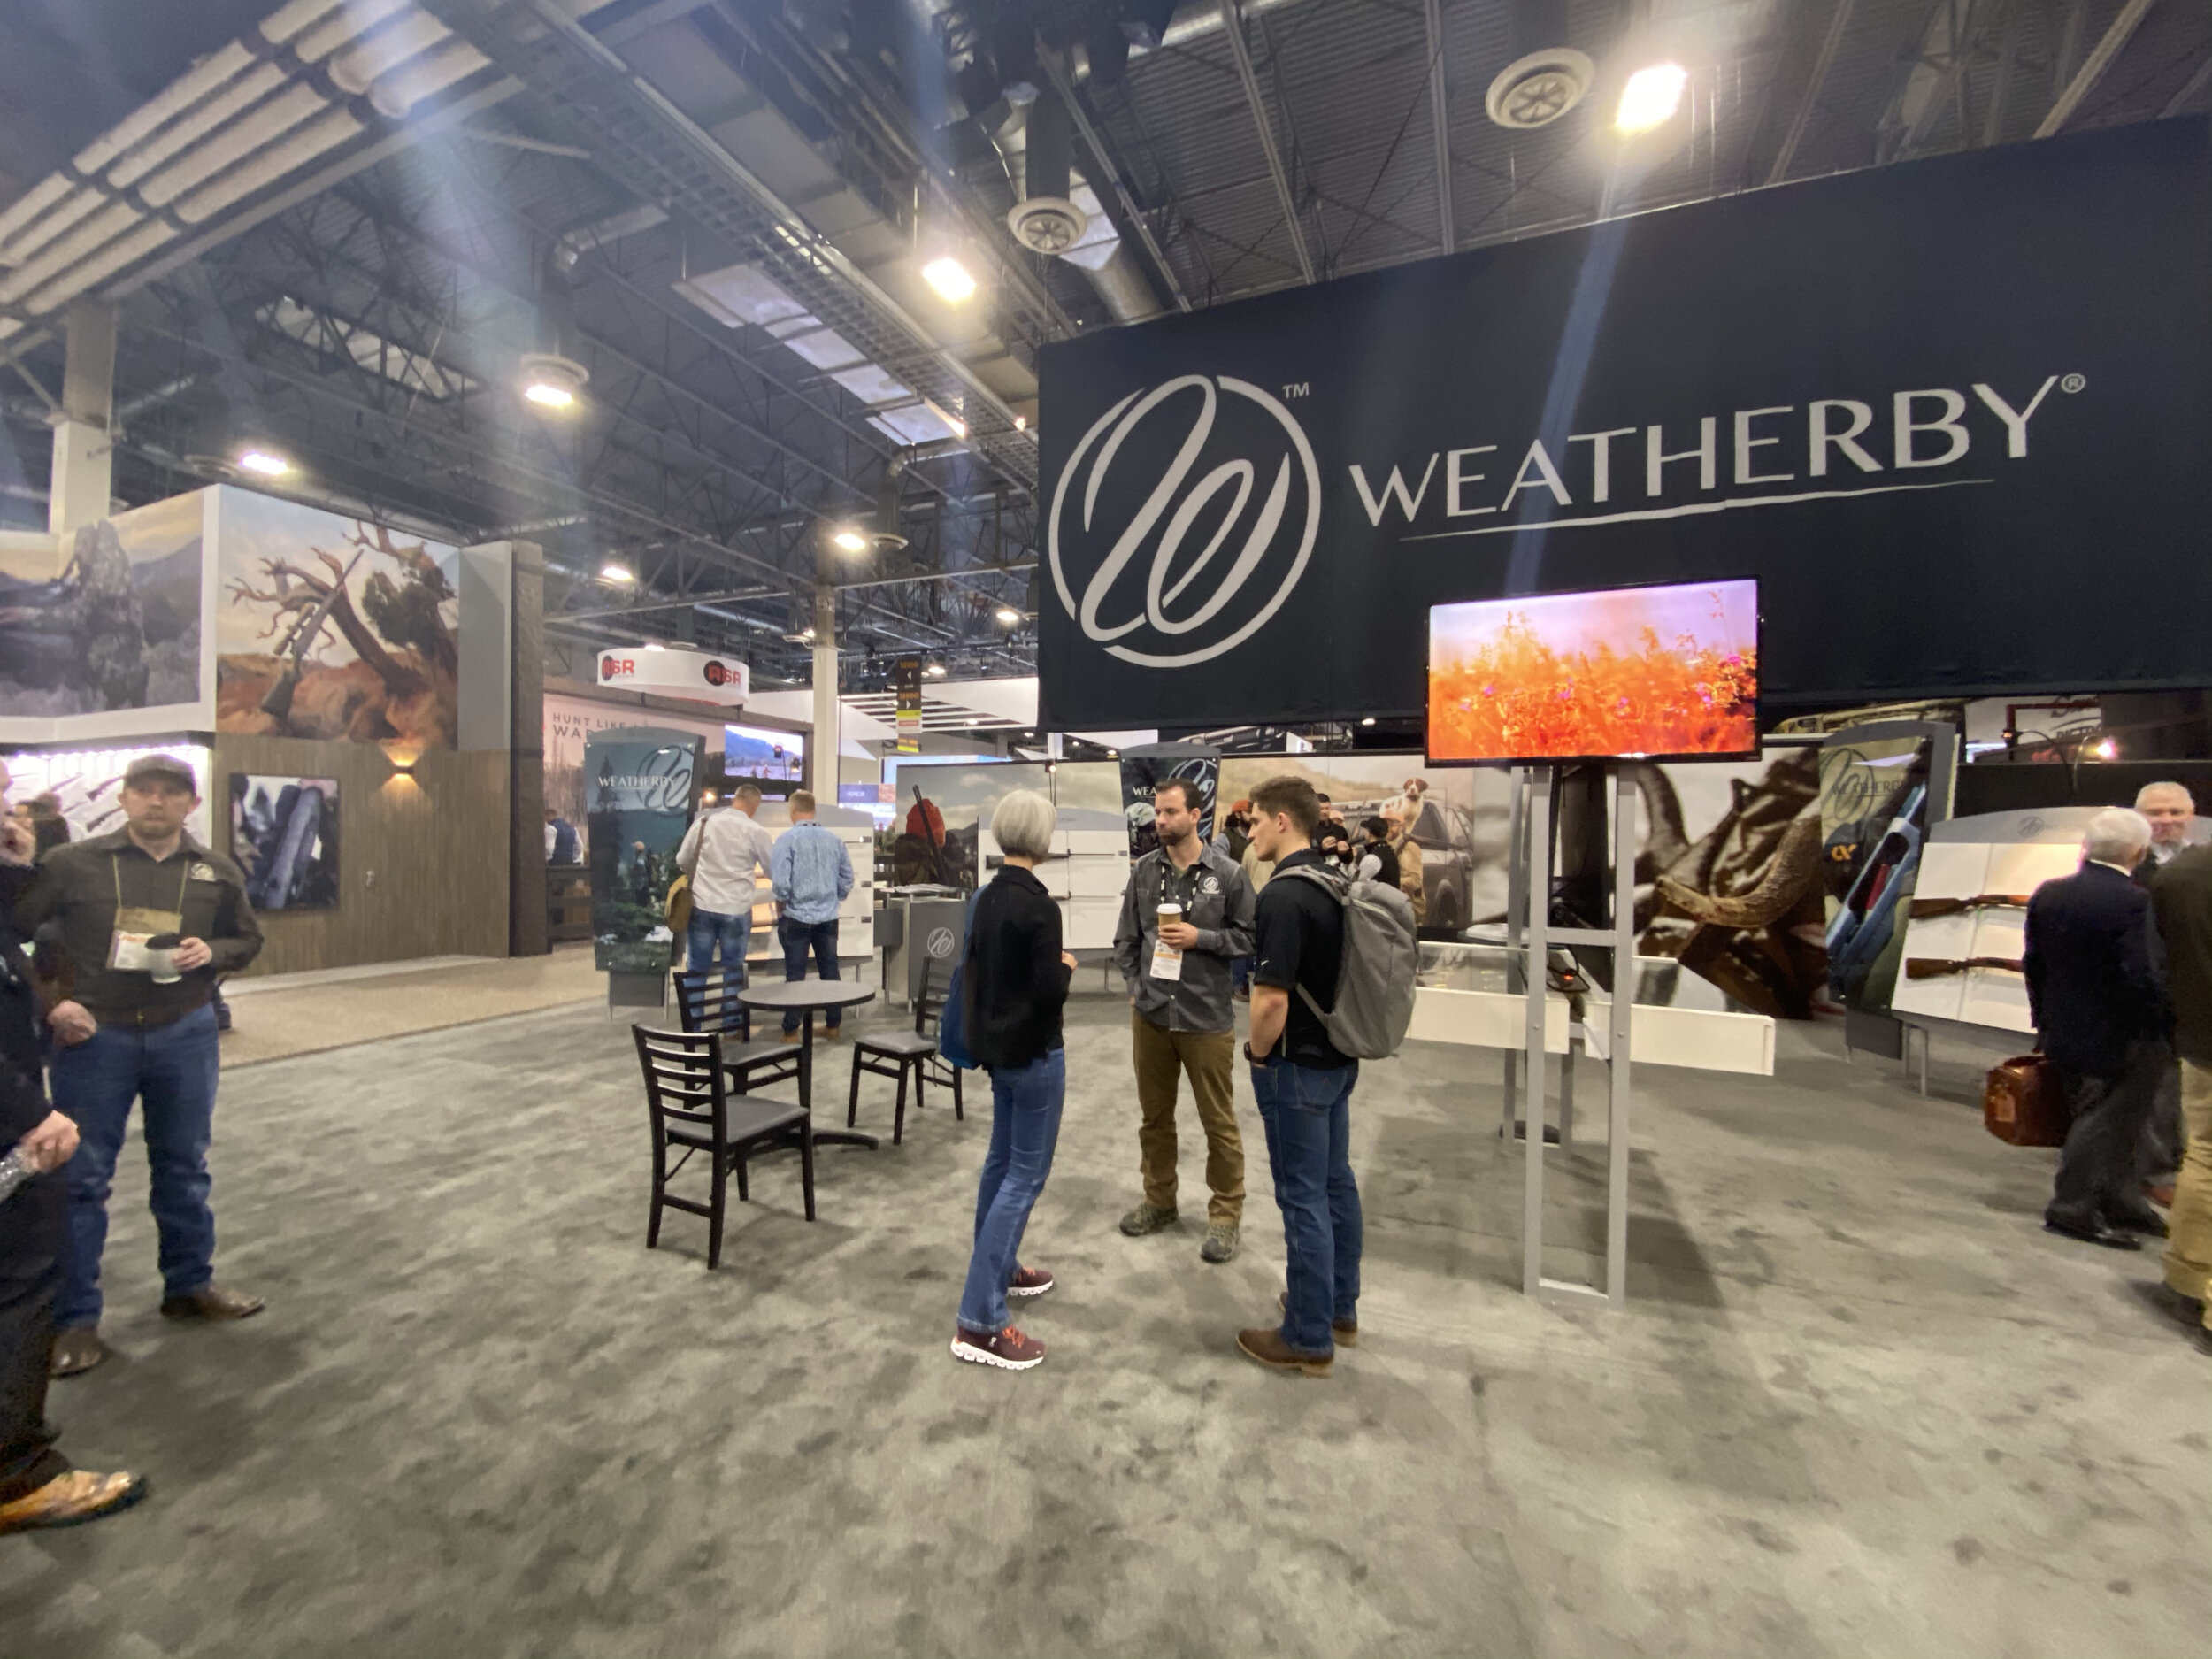 Weatherby Shot Show Booth Sign - © Weatherby, Inc.